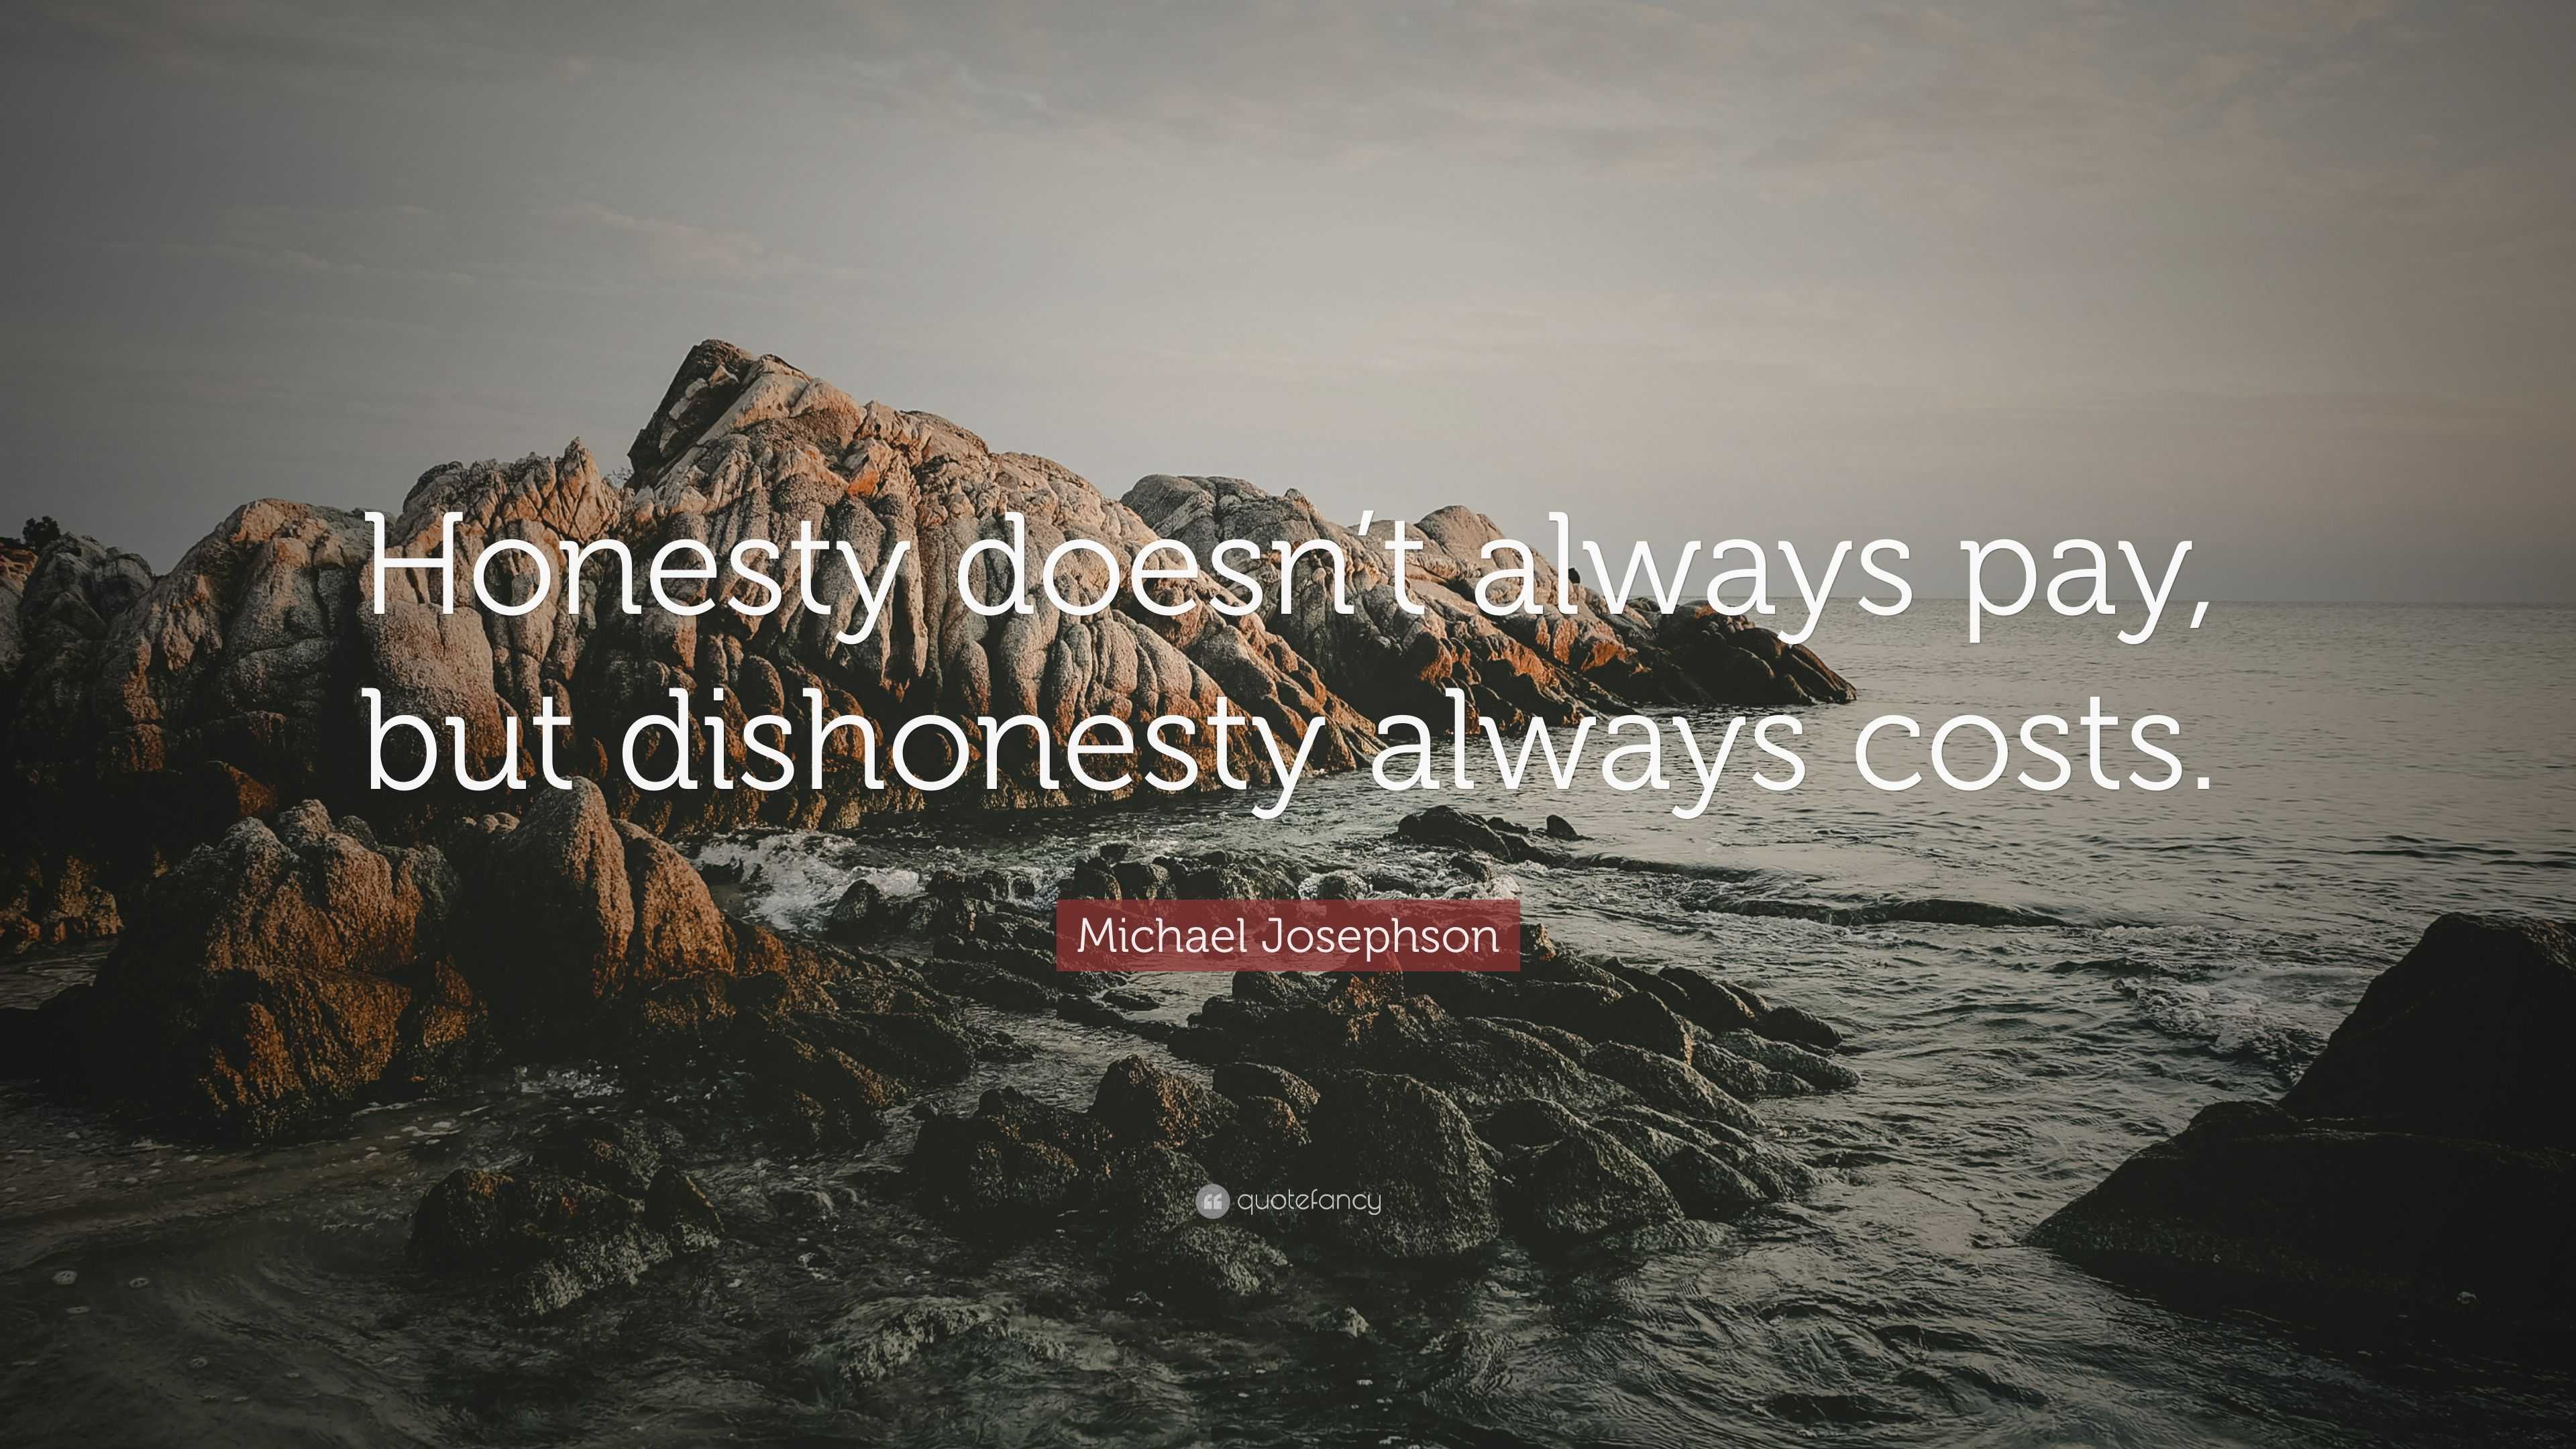 Michael Josephson Quote “honesty Doesn T Always Pay But Dishonesty Always Costs ”